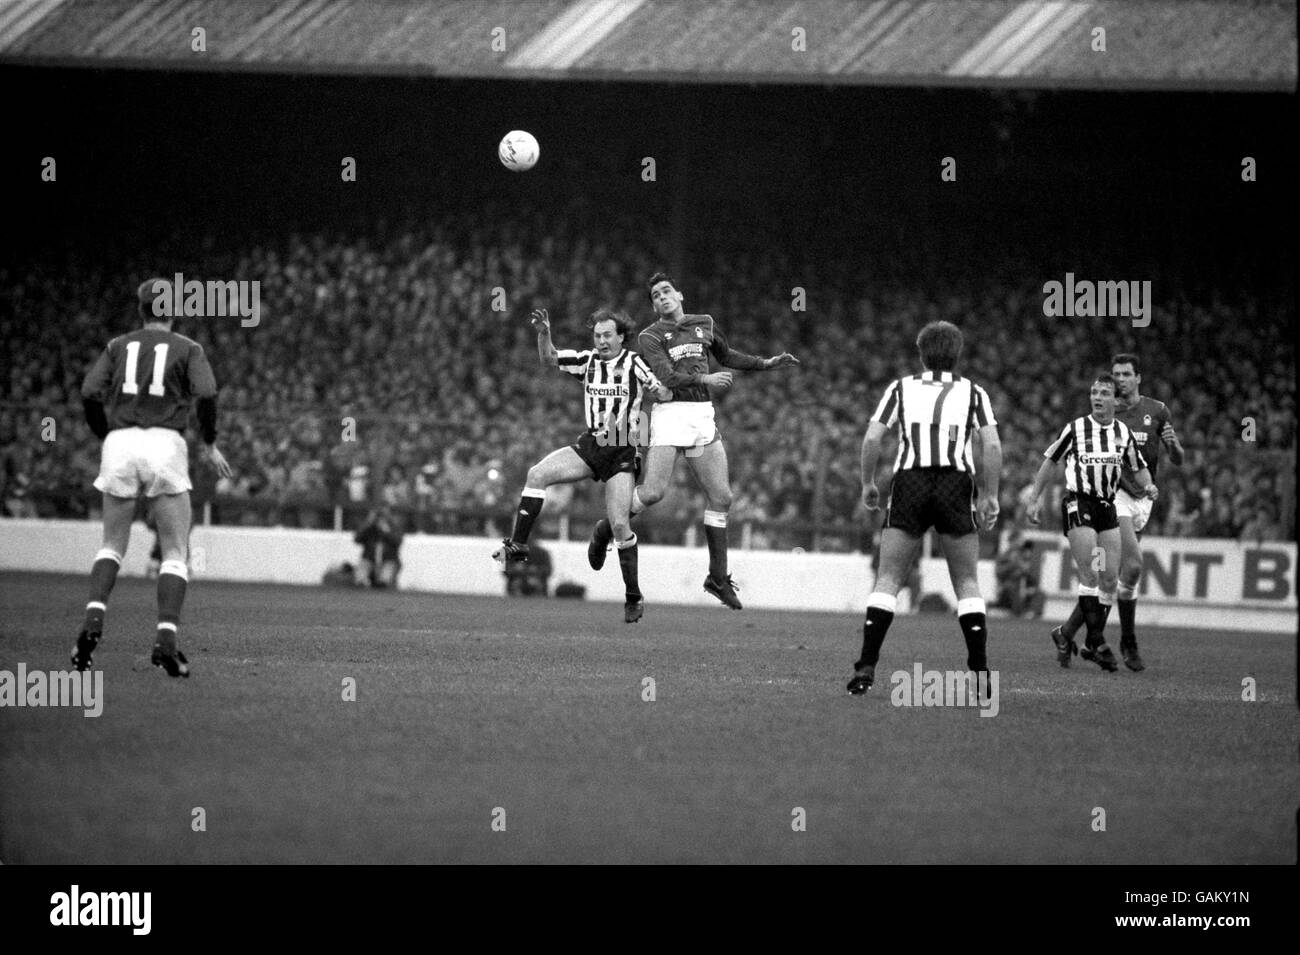 Nottingham Forest's Neil Webb (third l) beats Newcastle United's David McCreery (second l) to a header, watched by teammates Brian Rice (l) and Colin Foster (r), and Newcastle United's Neil McDonald (third r) and Paul Goddard (second r) Stock Photo